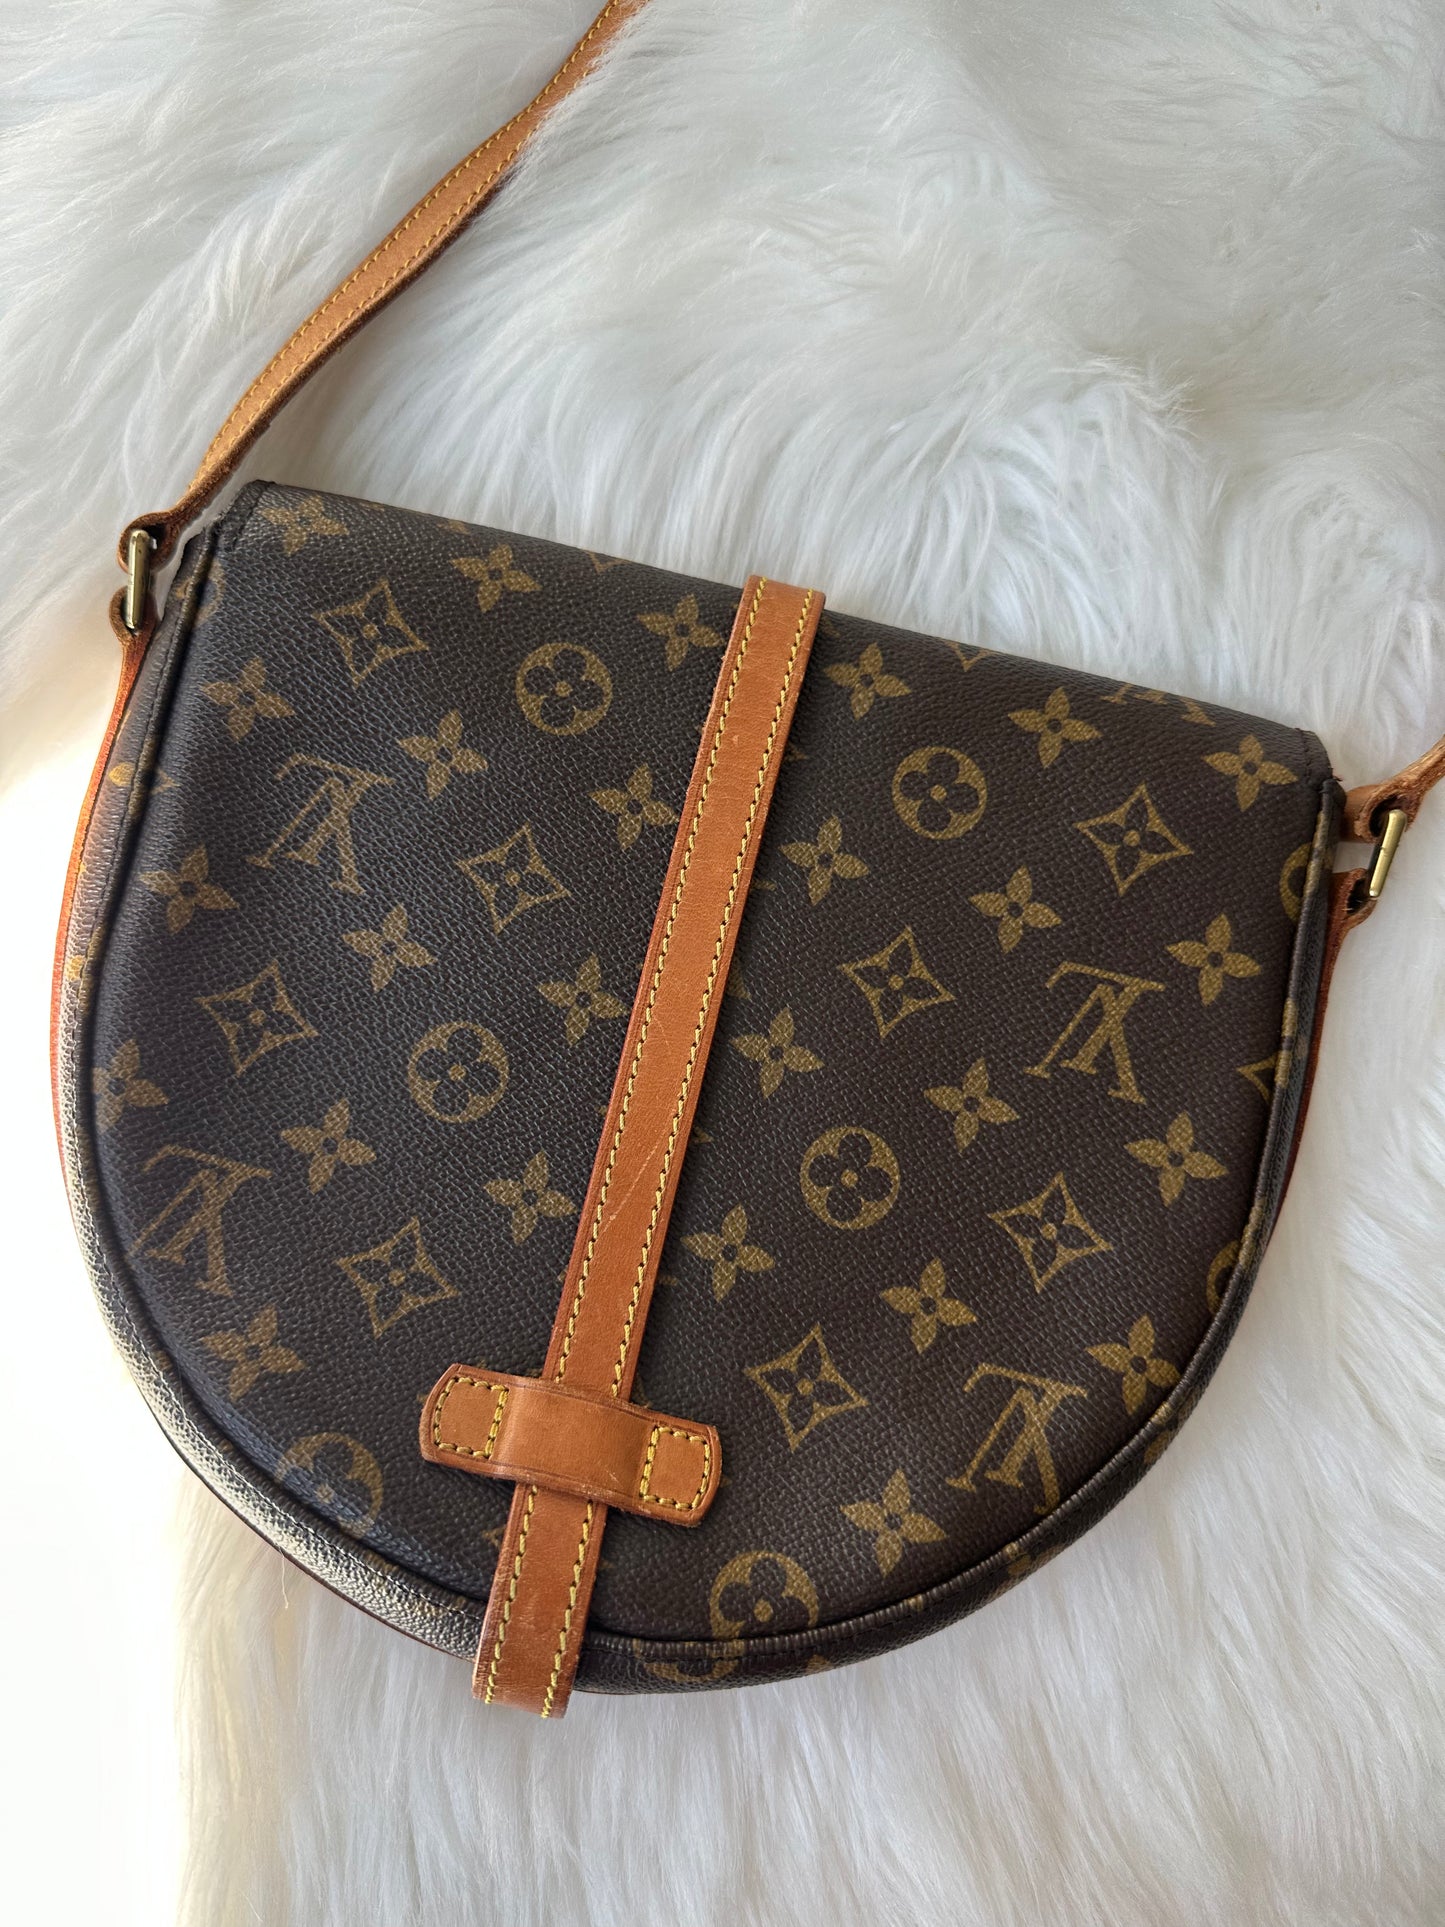 Pre-owned Authentic Louis Vuitton Chantilly MM Monogram Crossbody Bag